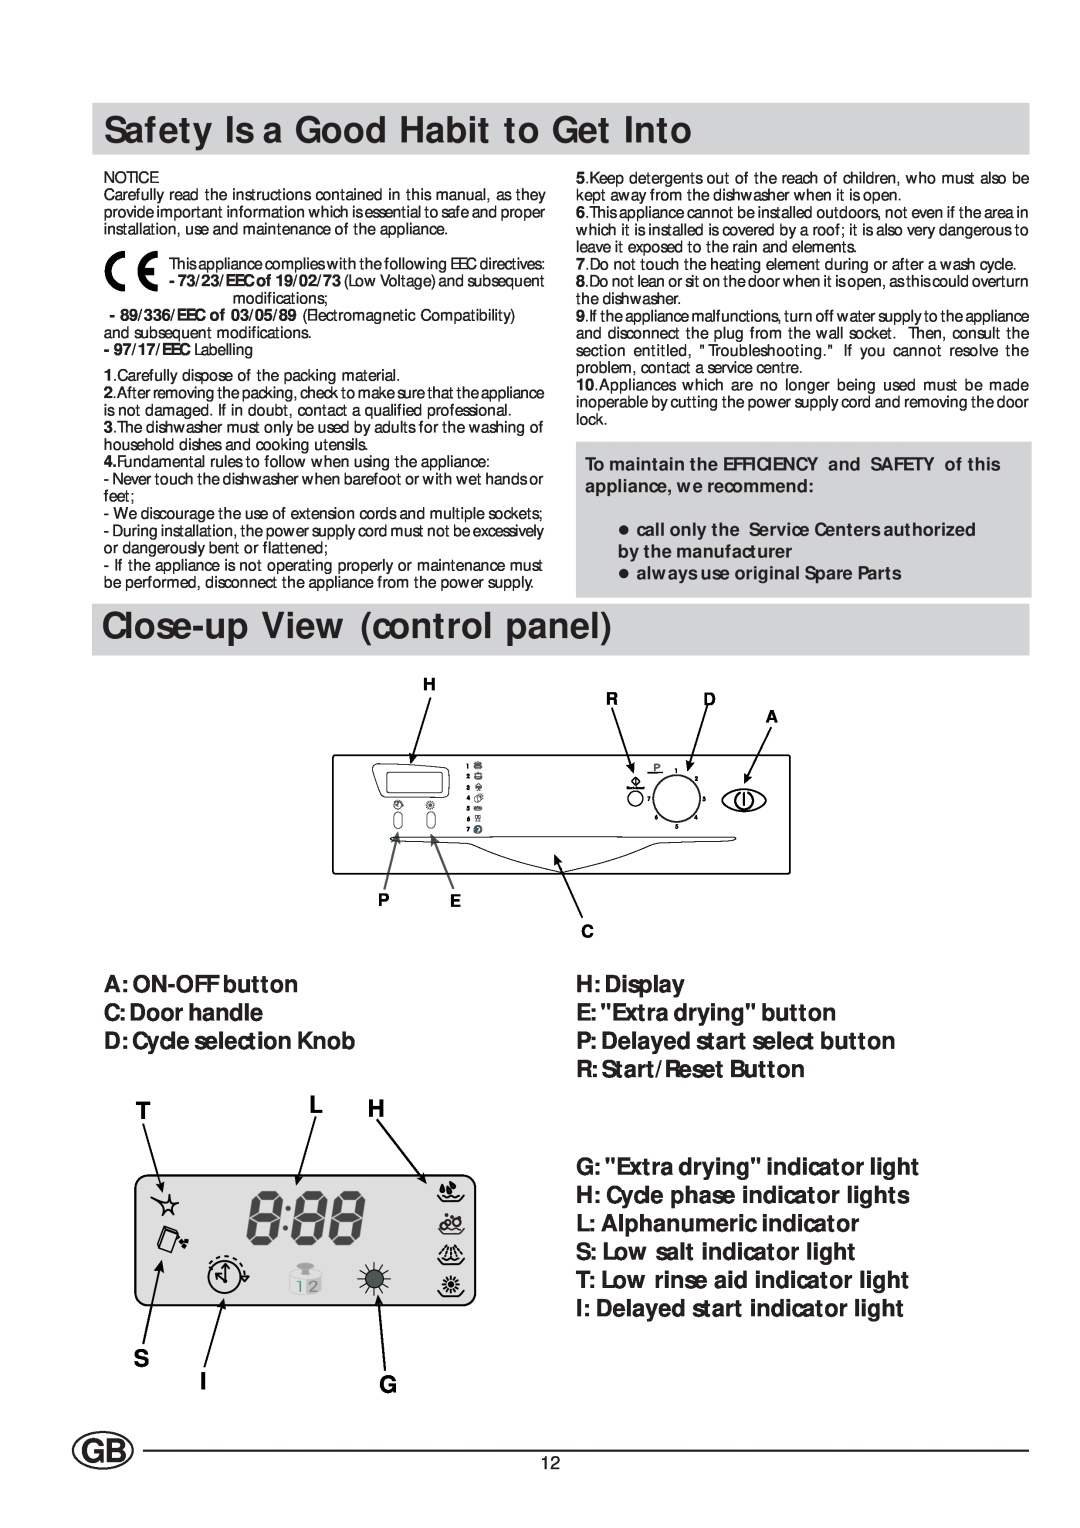 Indesit IDE 45 manual Safety Is a Good Habit to Get Into, Close-upView control panel 